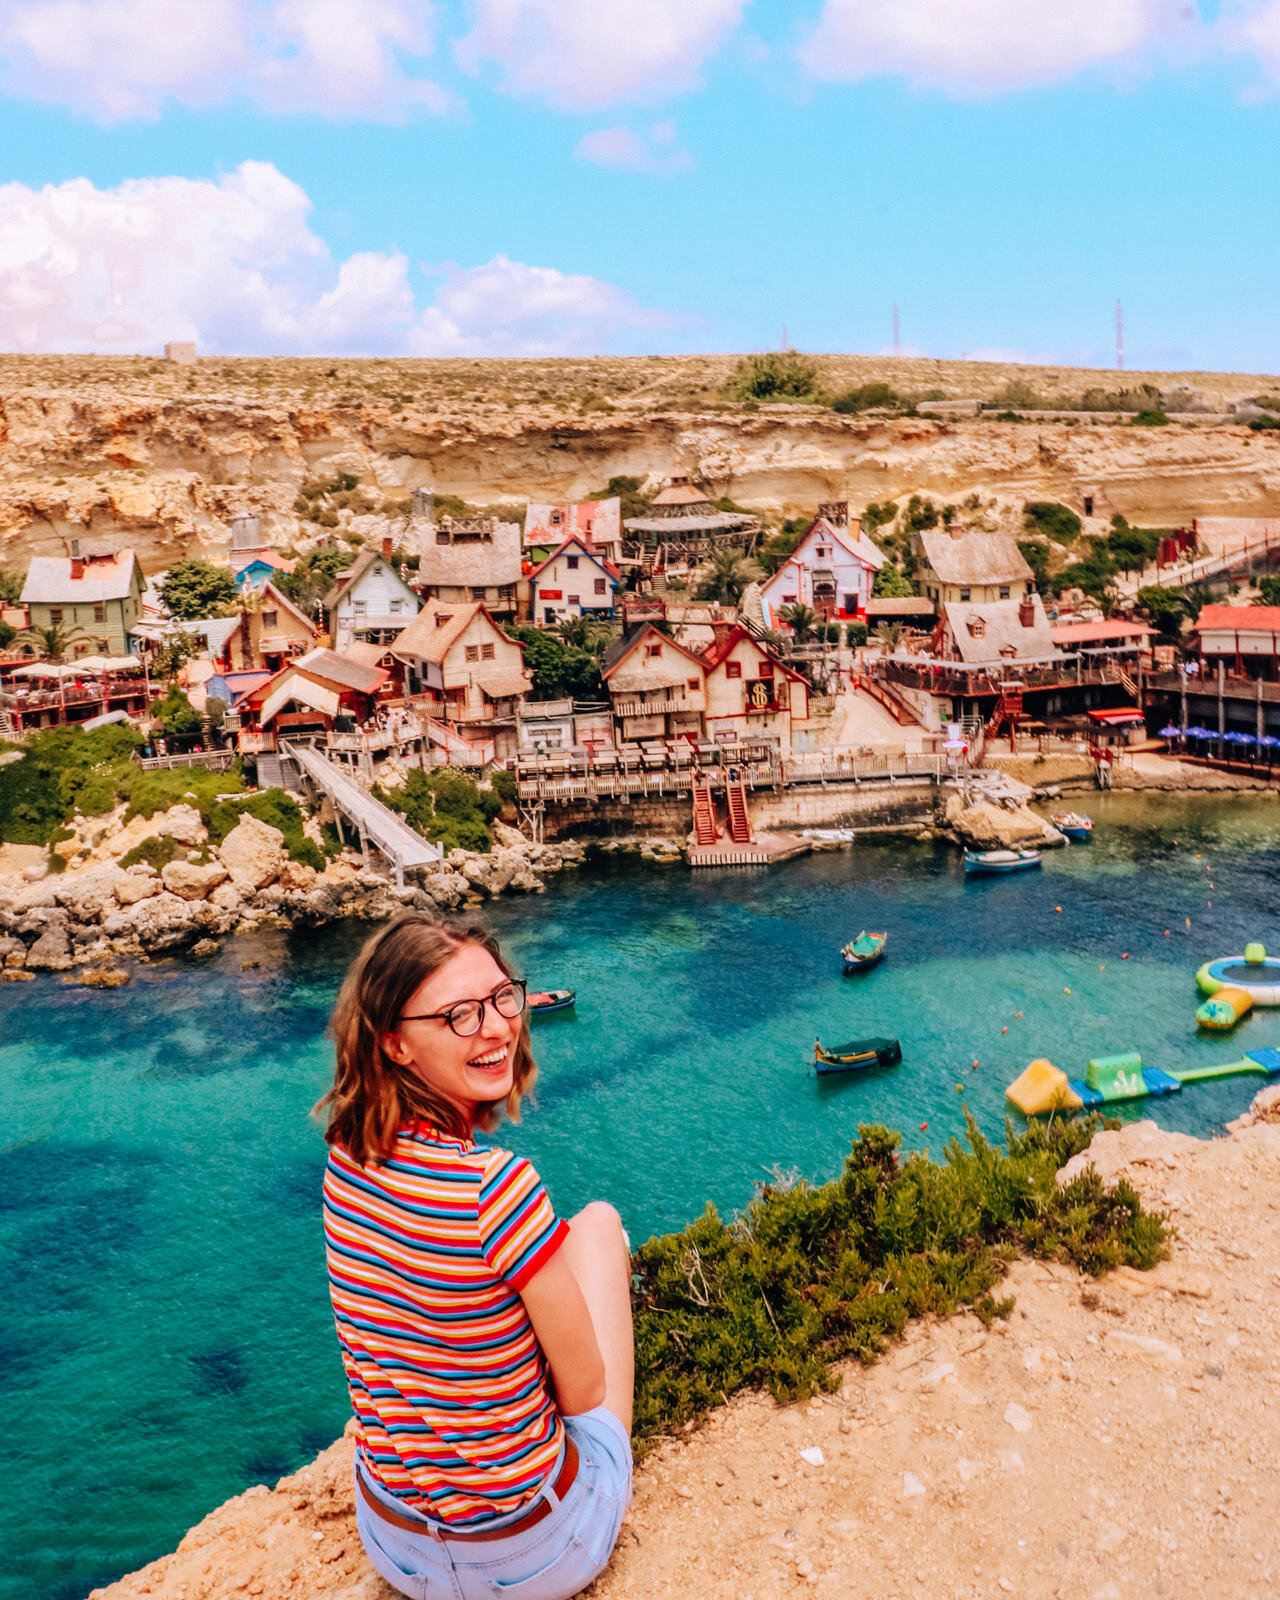 Helena sitting on the edge of a cliff looking out at the blue waters and village of the Popeye Village viewpoint in Malta